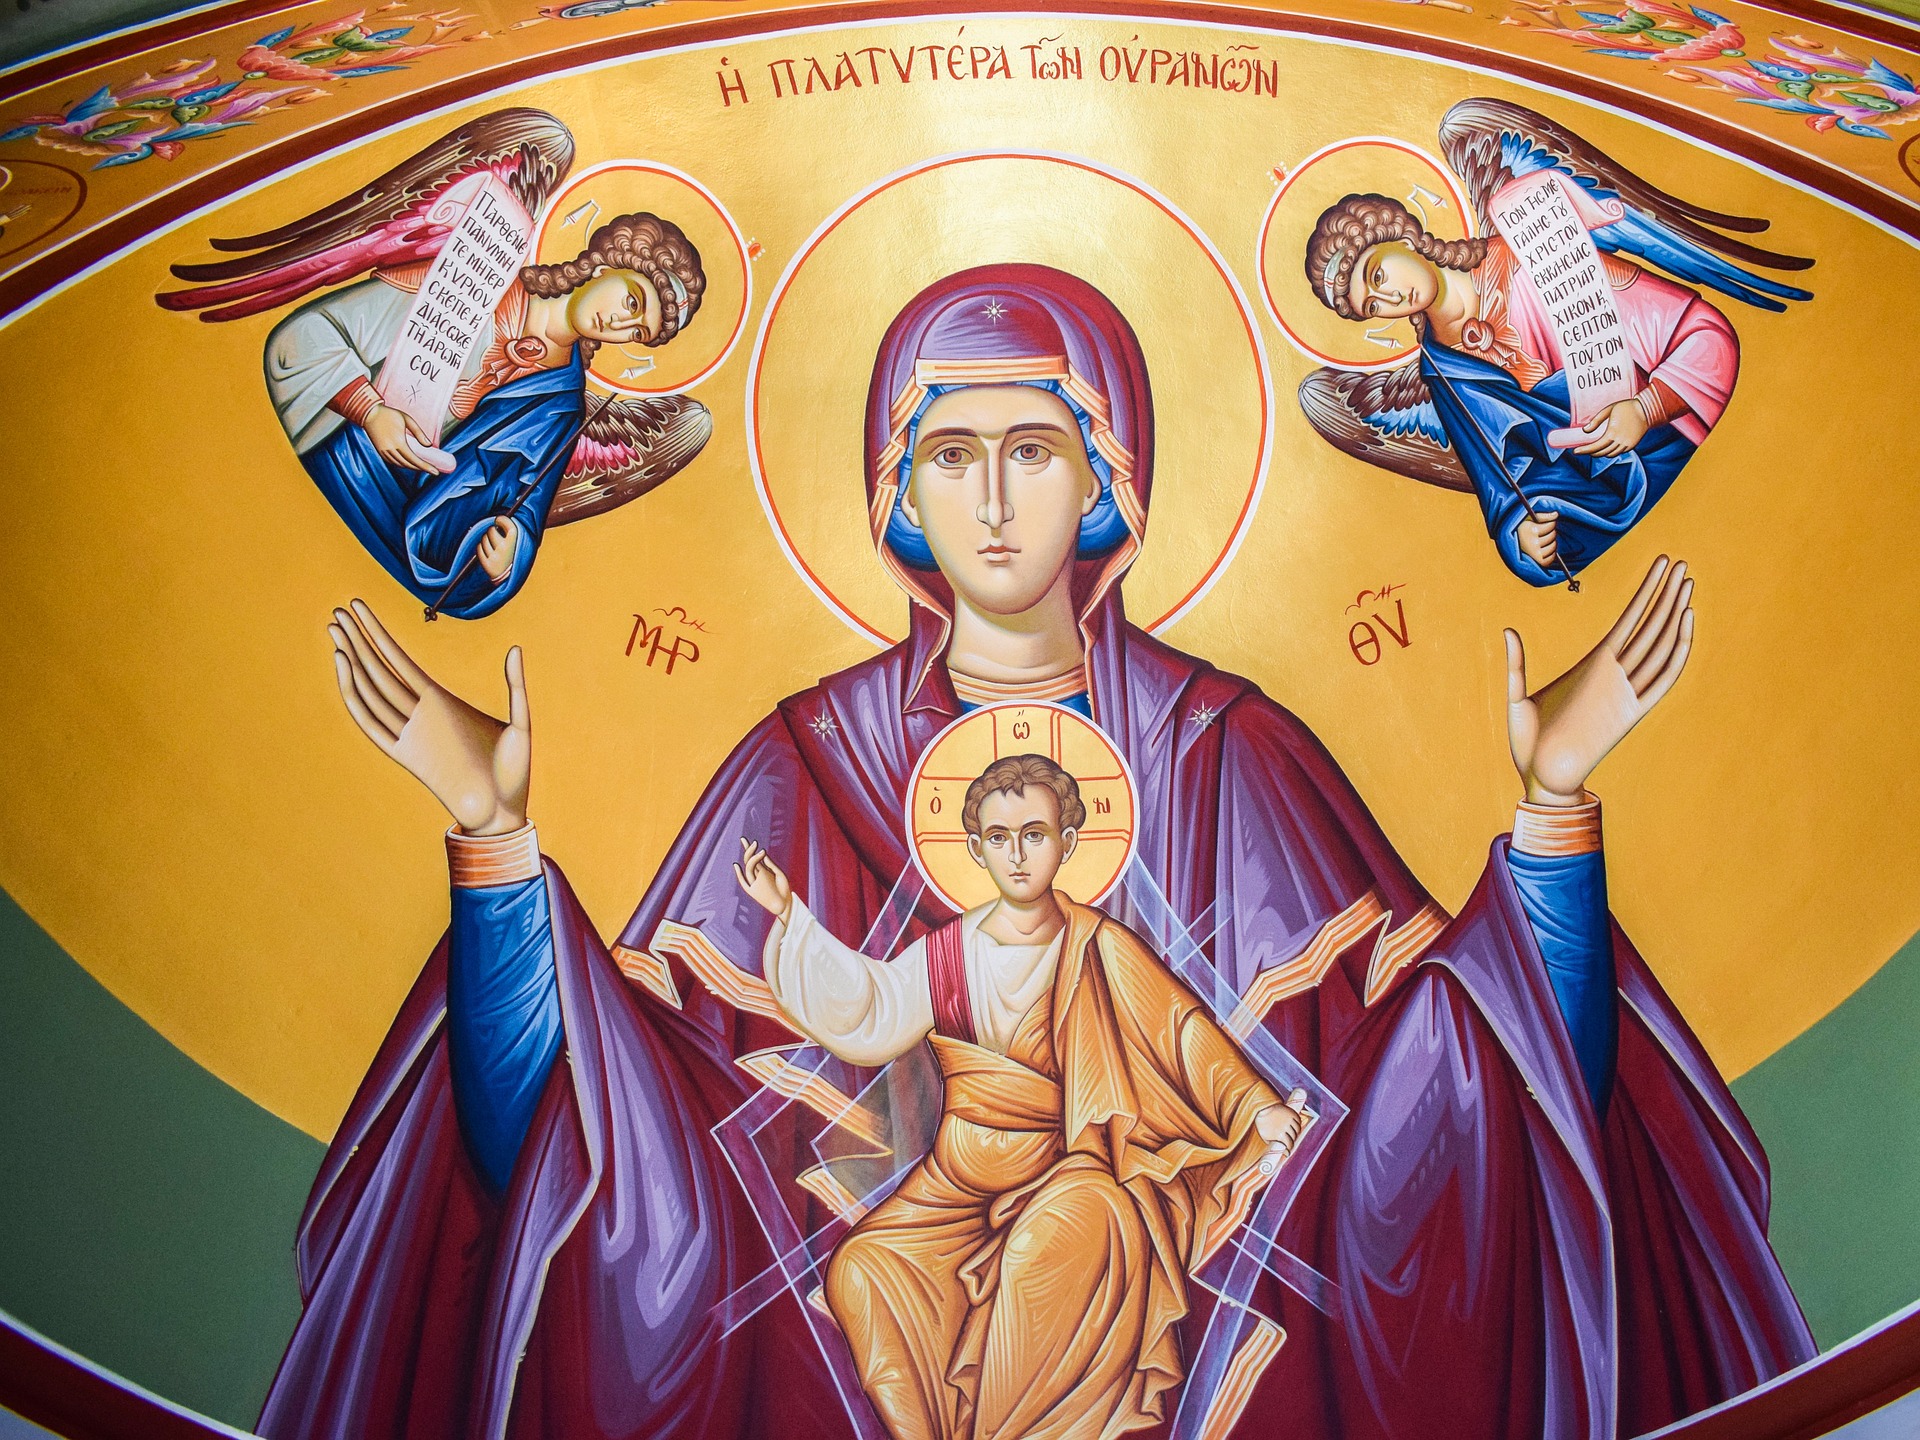 Mother of God, Virgin Mary, Theotokos, litany blessed, assumption, nativity, how old died, apparitions, baby Jesus, joseph, annunciation, catholic church, apparitions, prayer, about, Church, tomb, dormition, orthodox church, death, ephesus, early life, facts, family tree, genealogy, bible